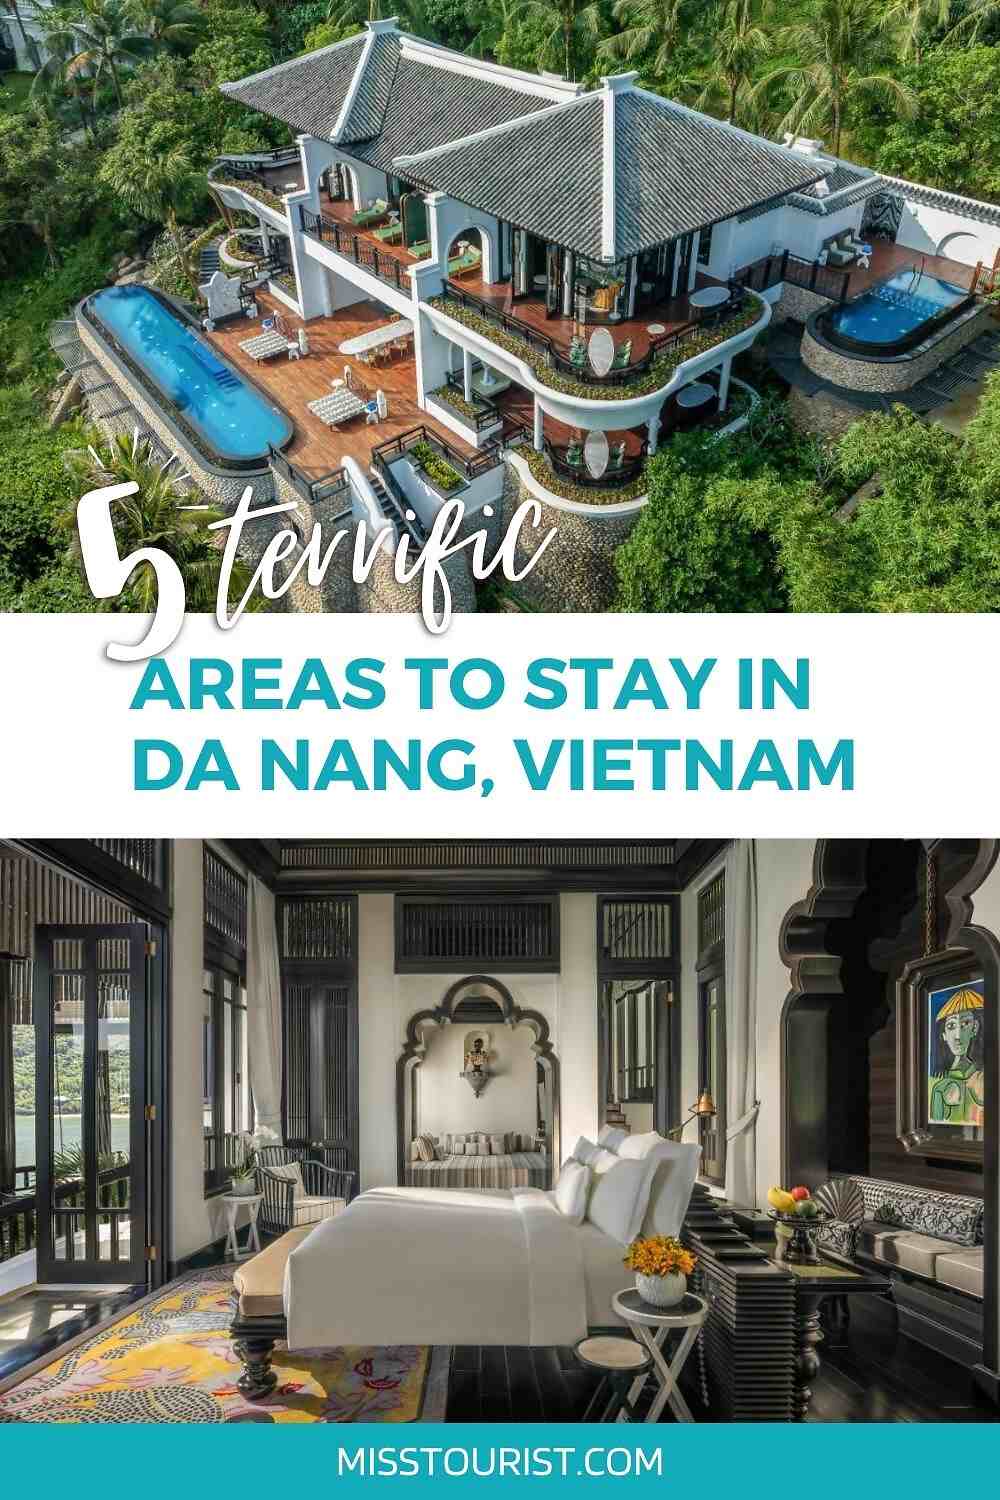 Aerial view of a high-end villa with a blue swimming pool amidst lush greenery, highlighting luxury accommodation options in Da Nang, Vietna